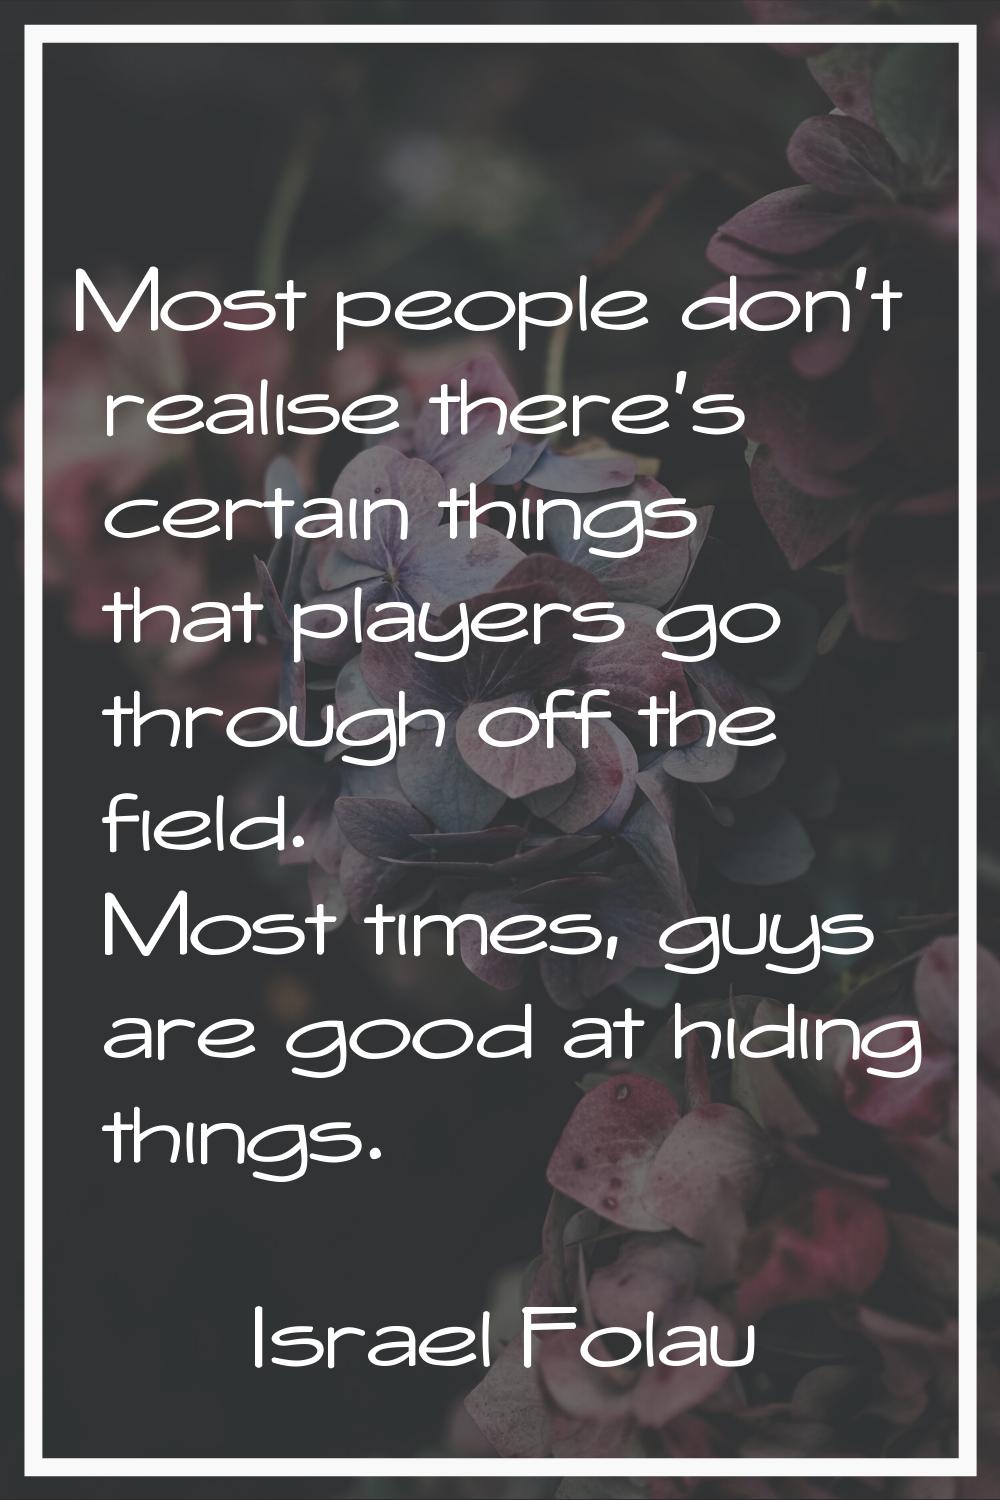 Most people don't realise there's certain things that players go through off the field. Most times,